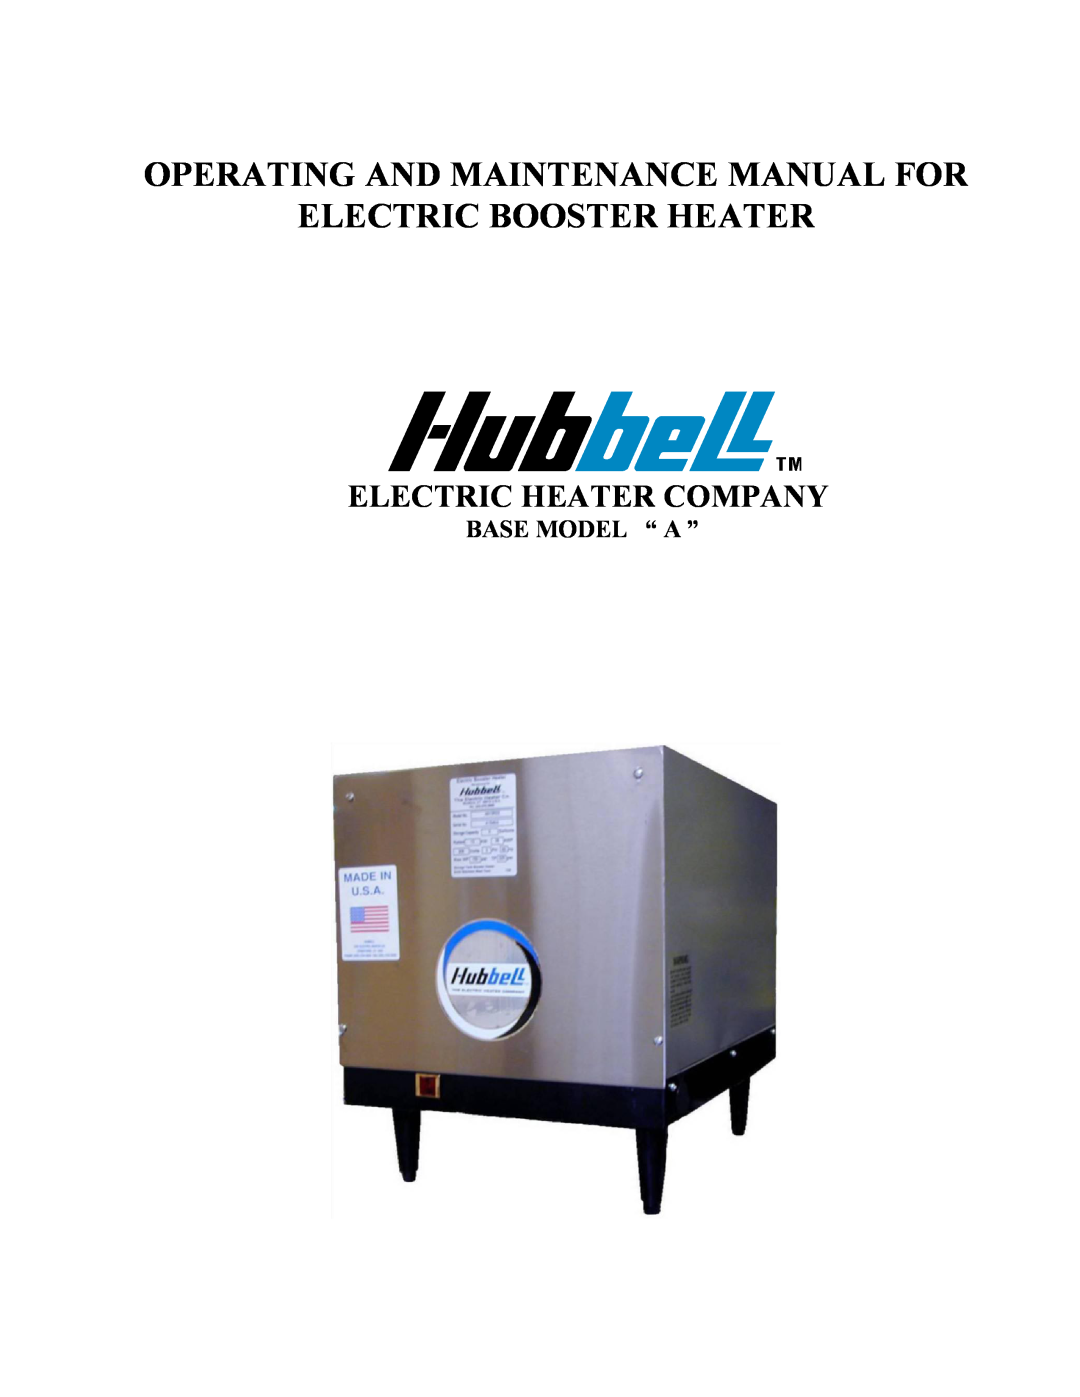 Hubbell Electric Heater Company manual Base Model “ A ”, Operating And Maintenance Manual For, Electric Booster Heater 